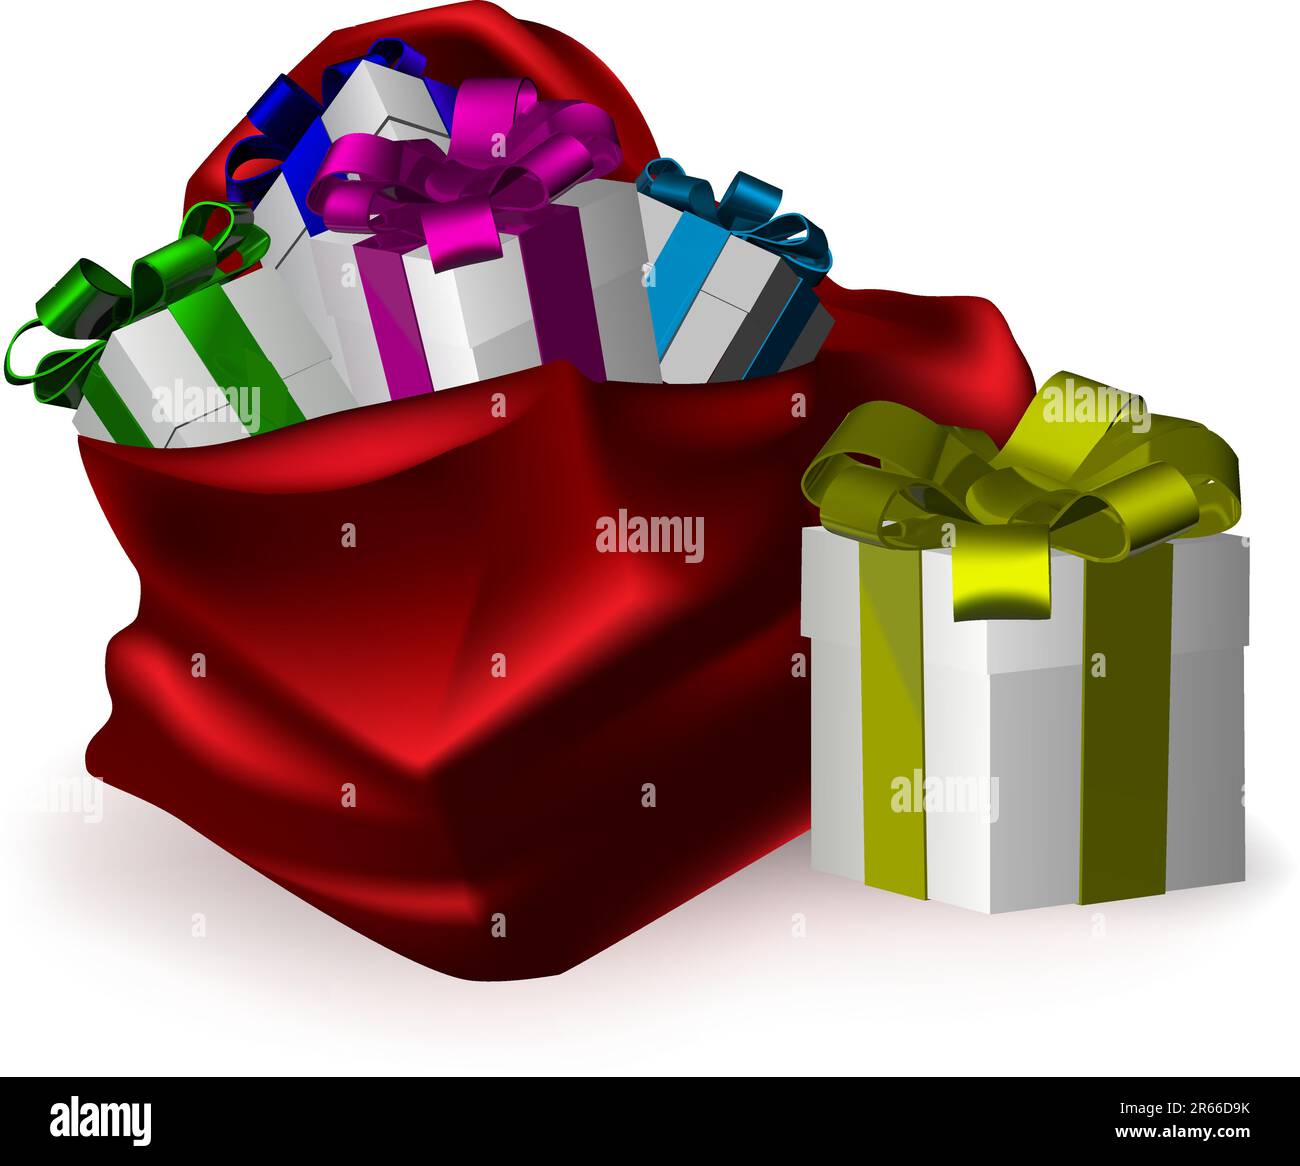 an illustration of gifts bursting from a festive red sack Stock Vector